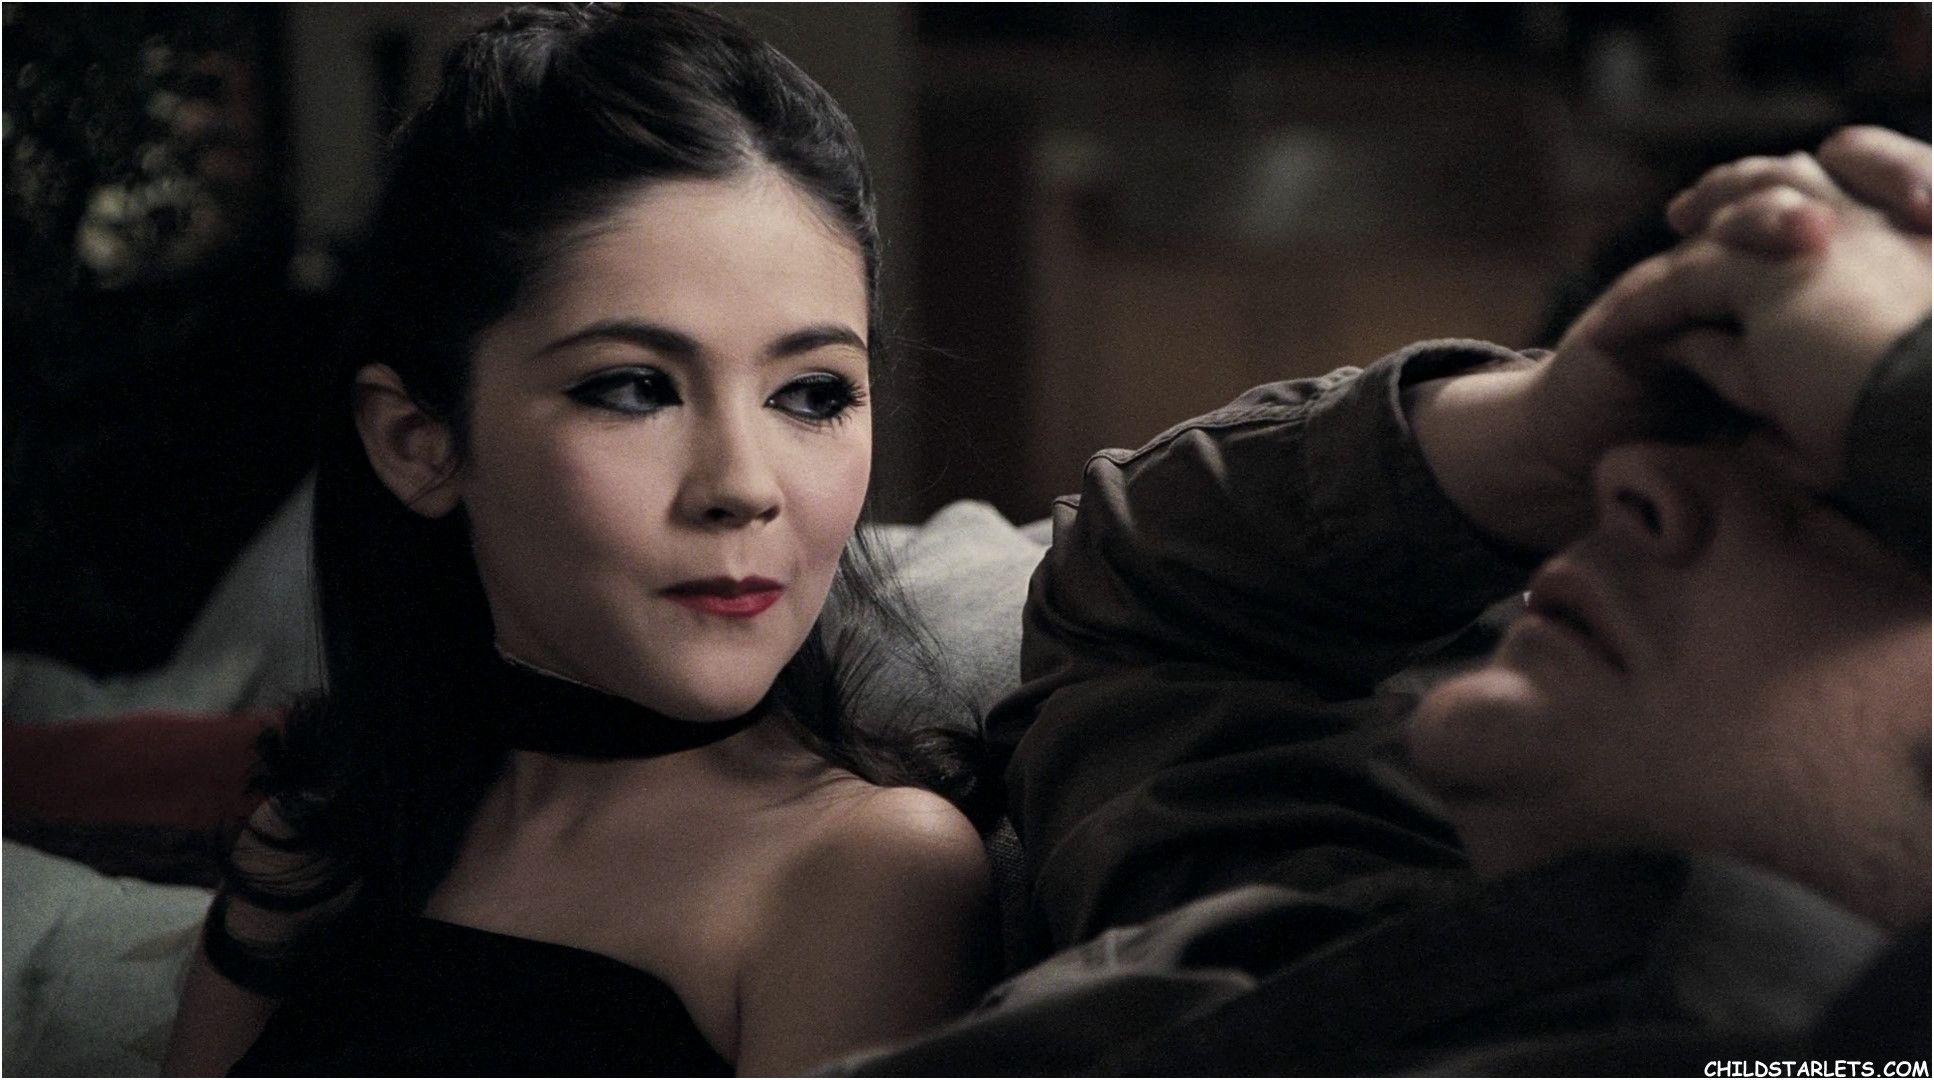 Isabelle Fuhrman as Esther in #Orphan (2009), an American